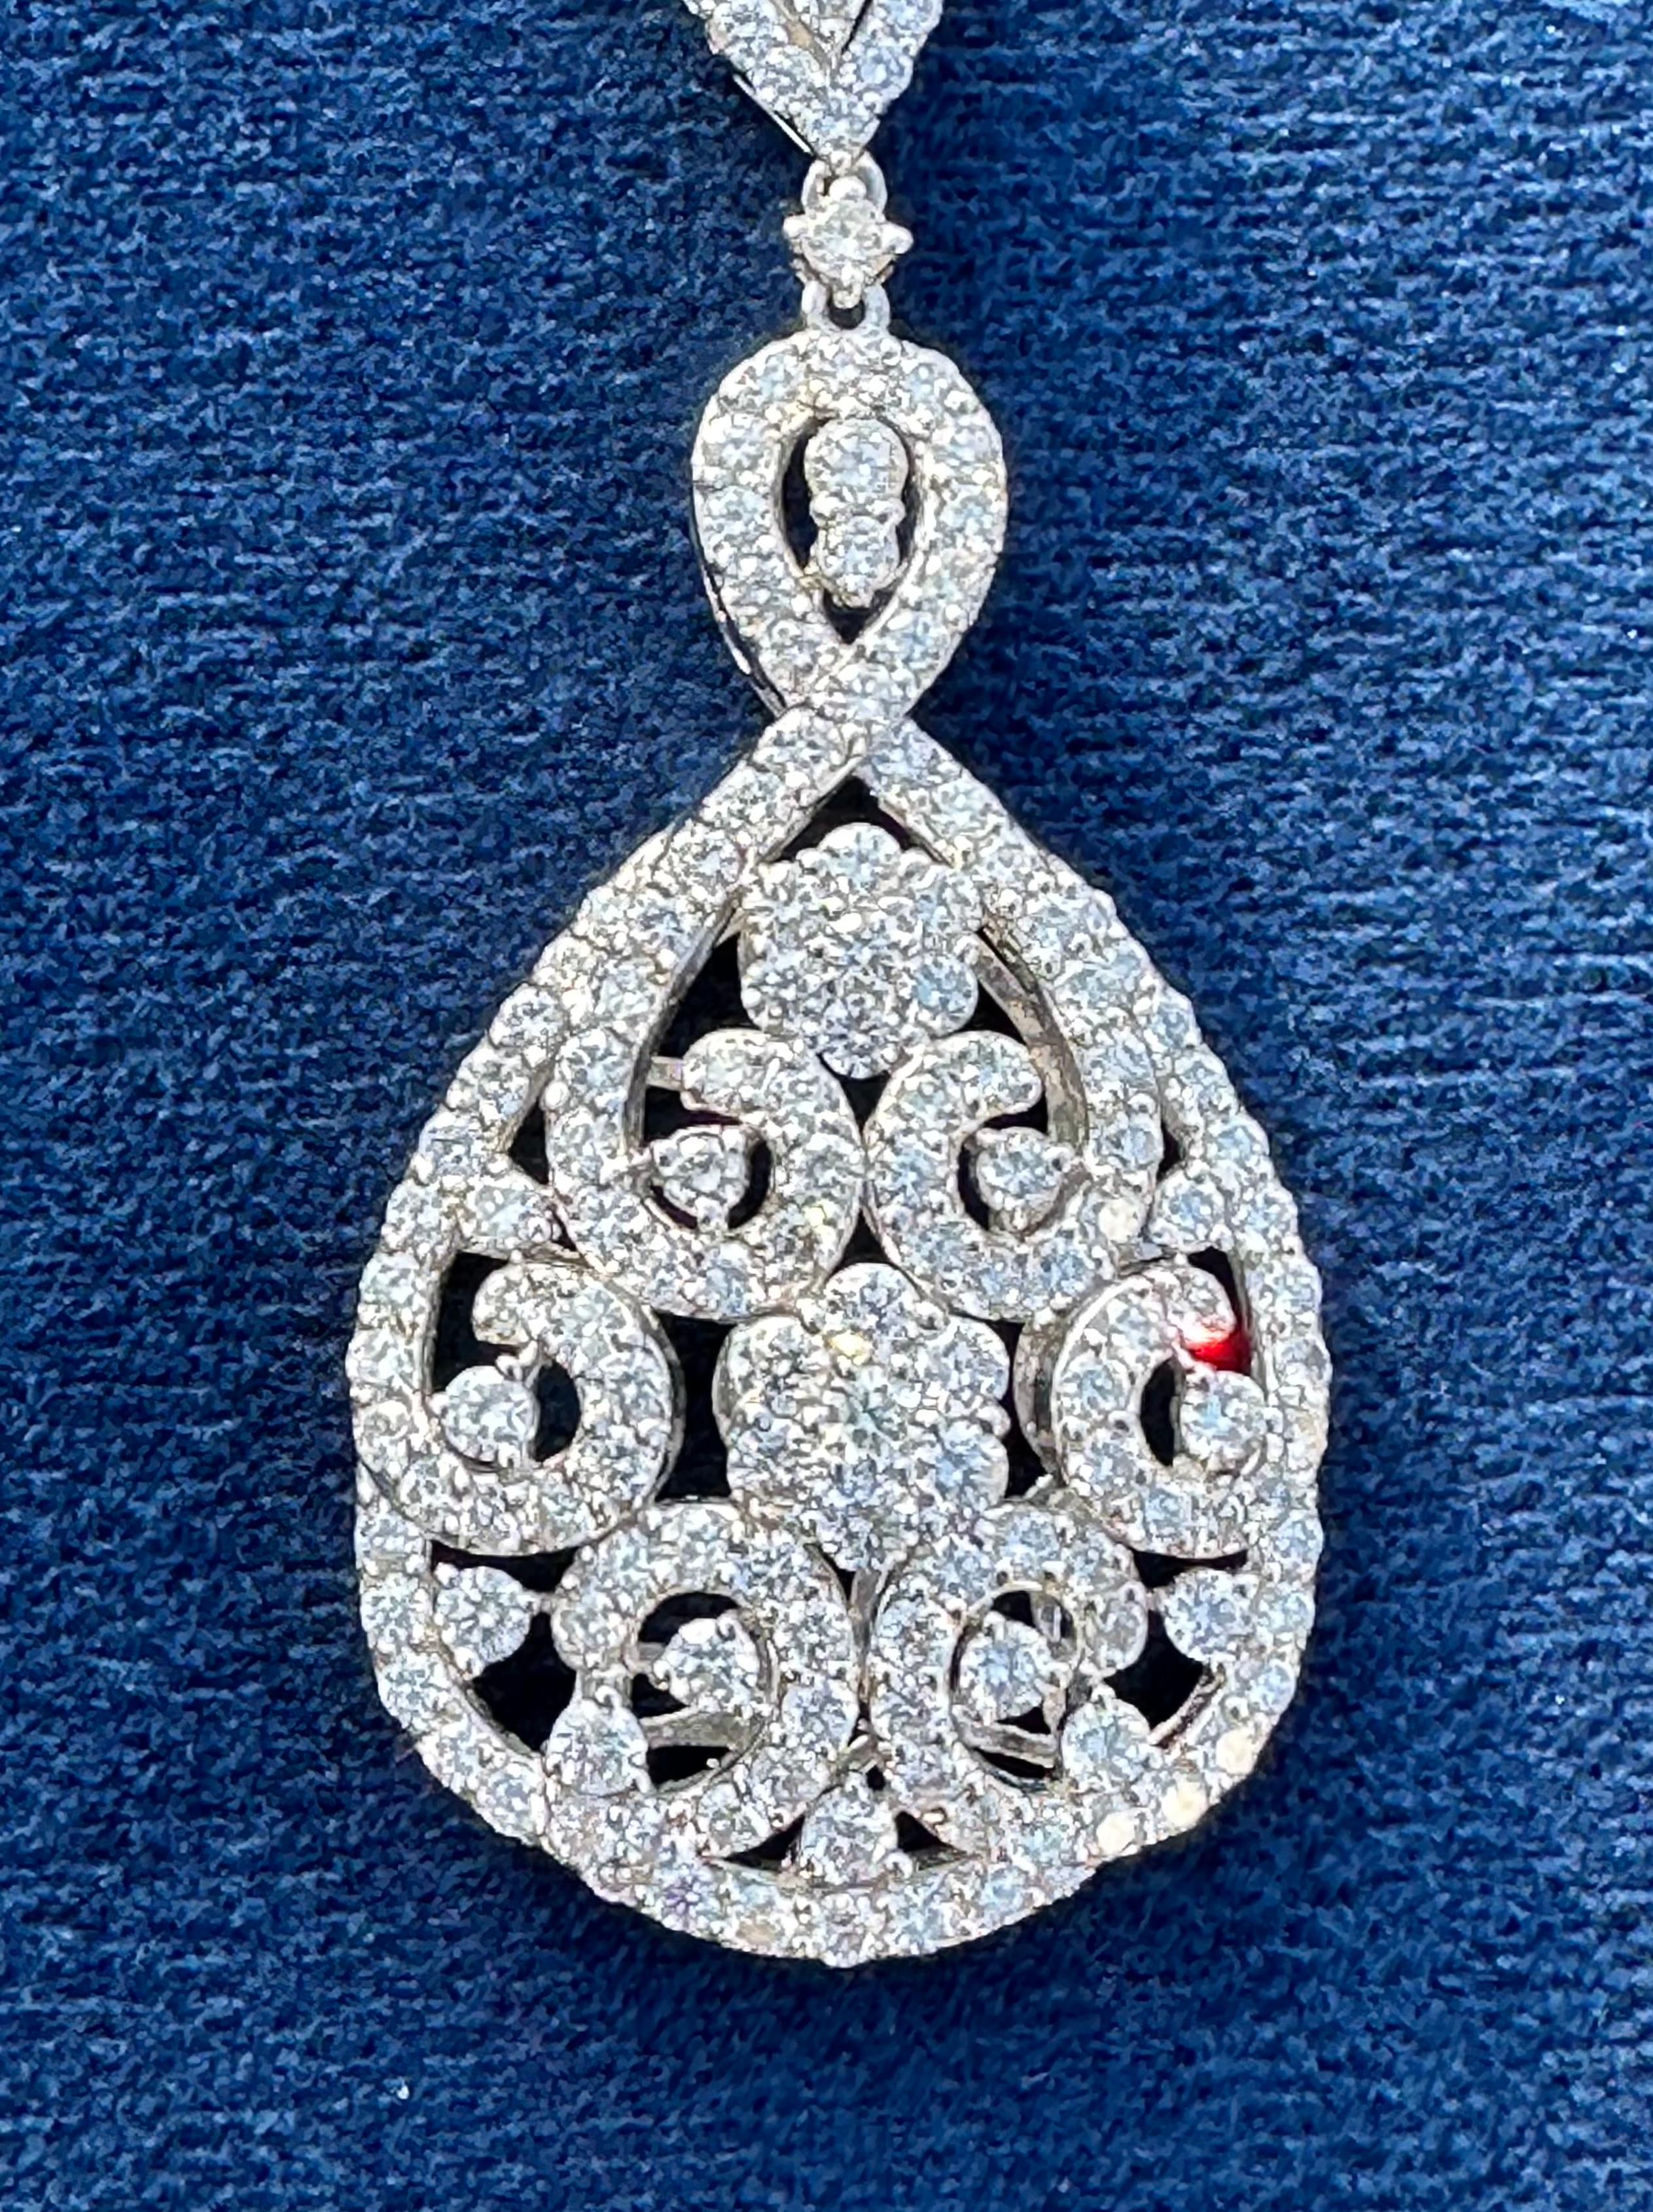 Magnificent 8.5 Carat Diamond 18K White Gold Pear Shaped Drop Pendant on Chain In Excellent Condition For Sale In Tustin, CA